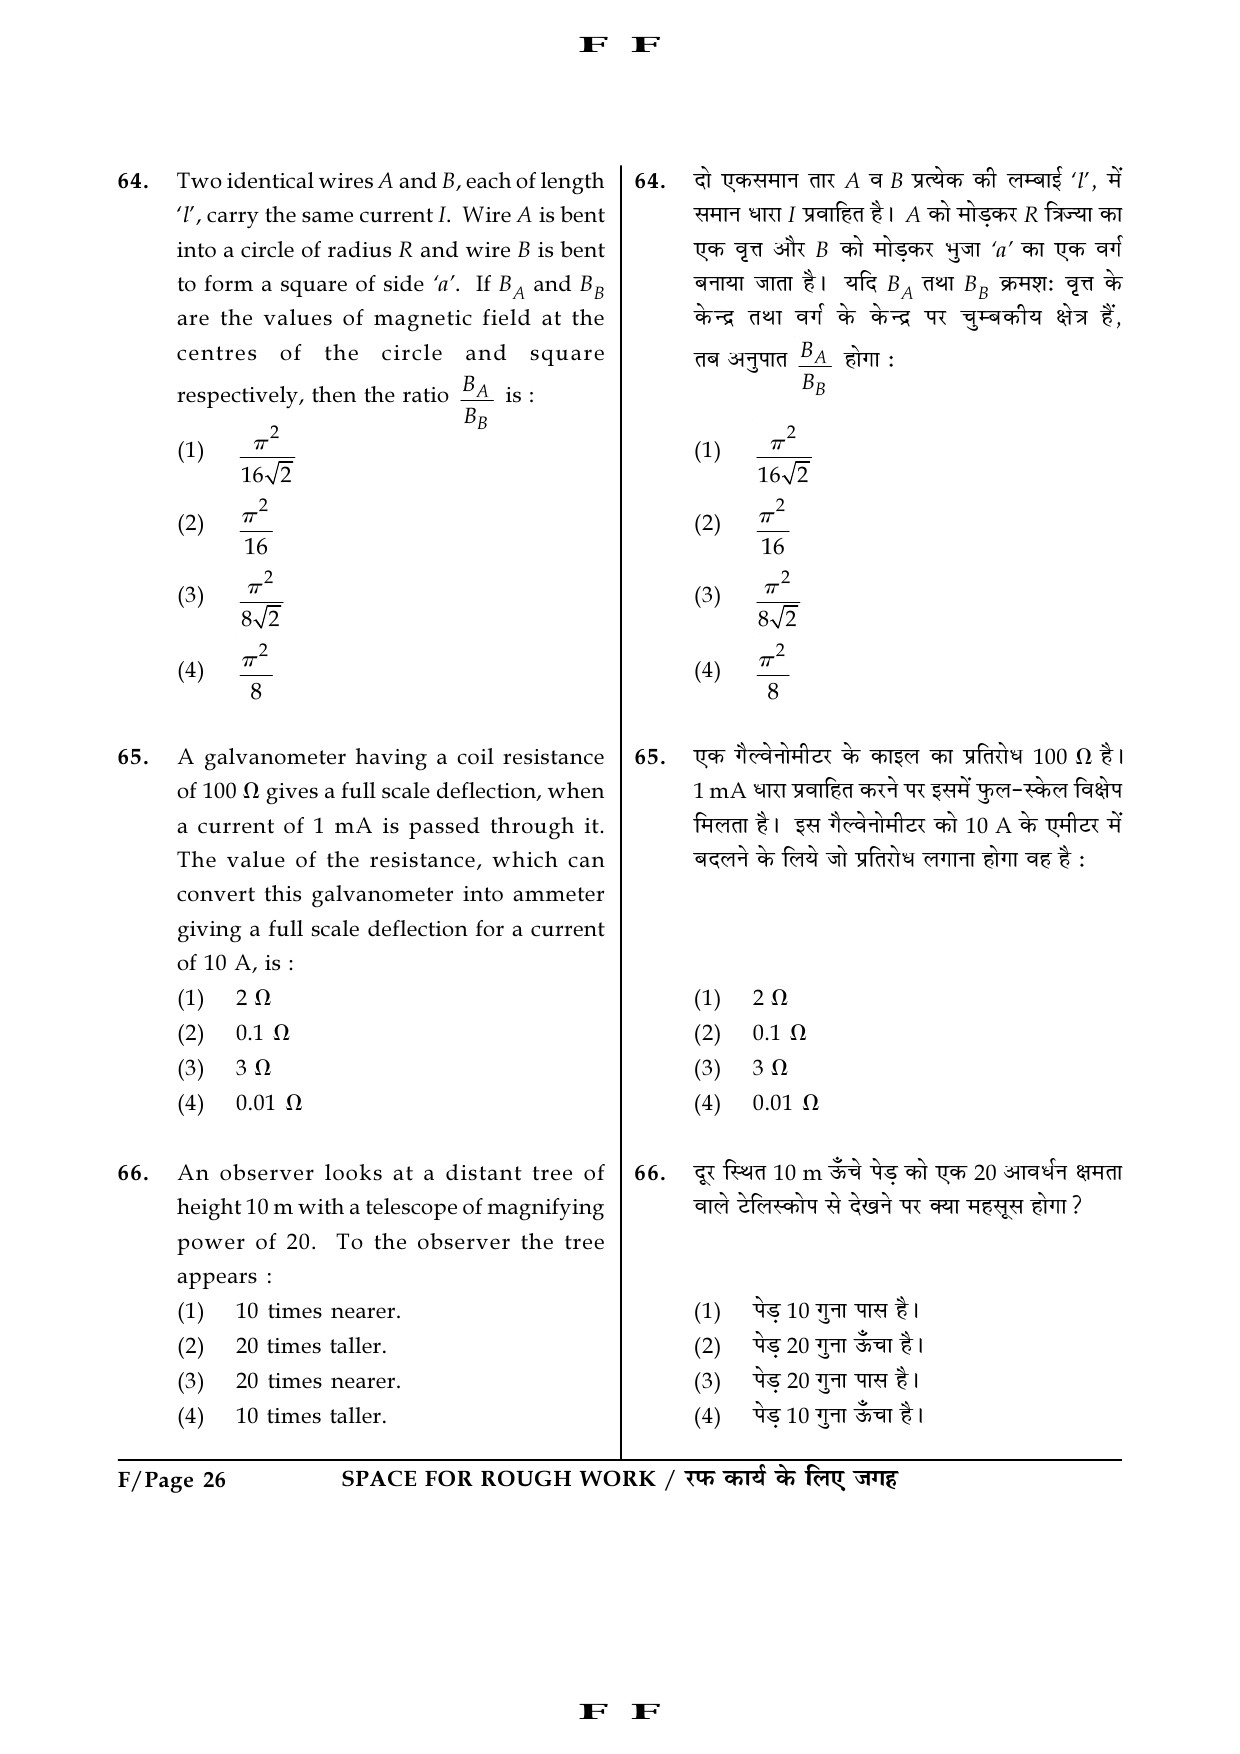 JEE Main Exam Question Paper 2016 Booklet F 26